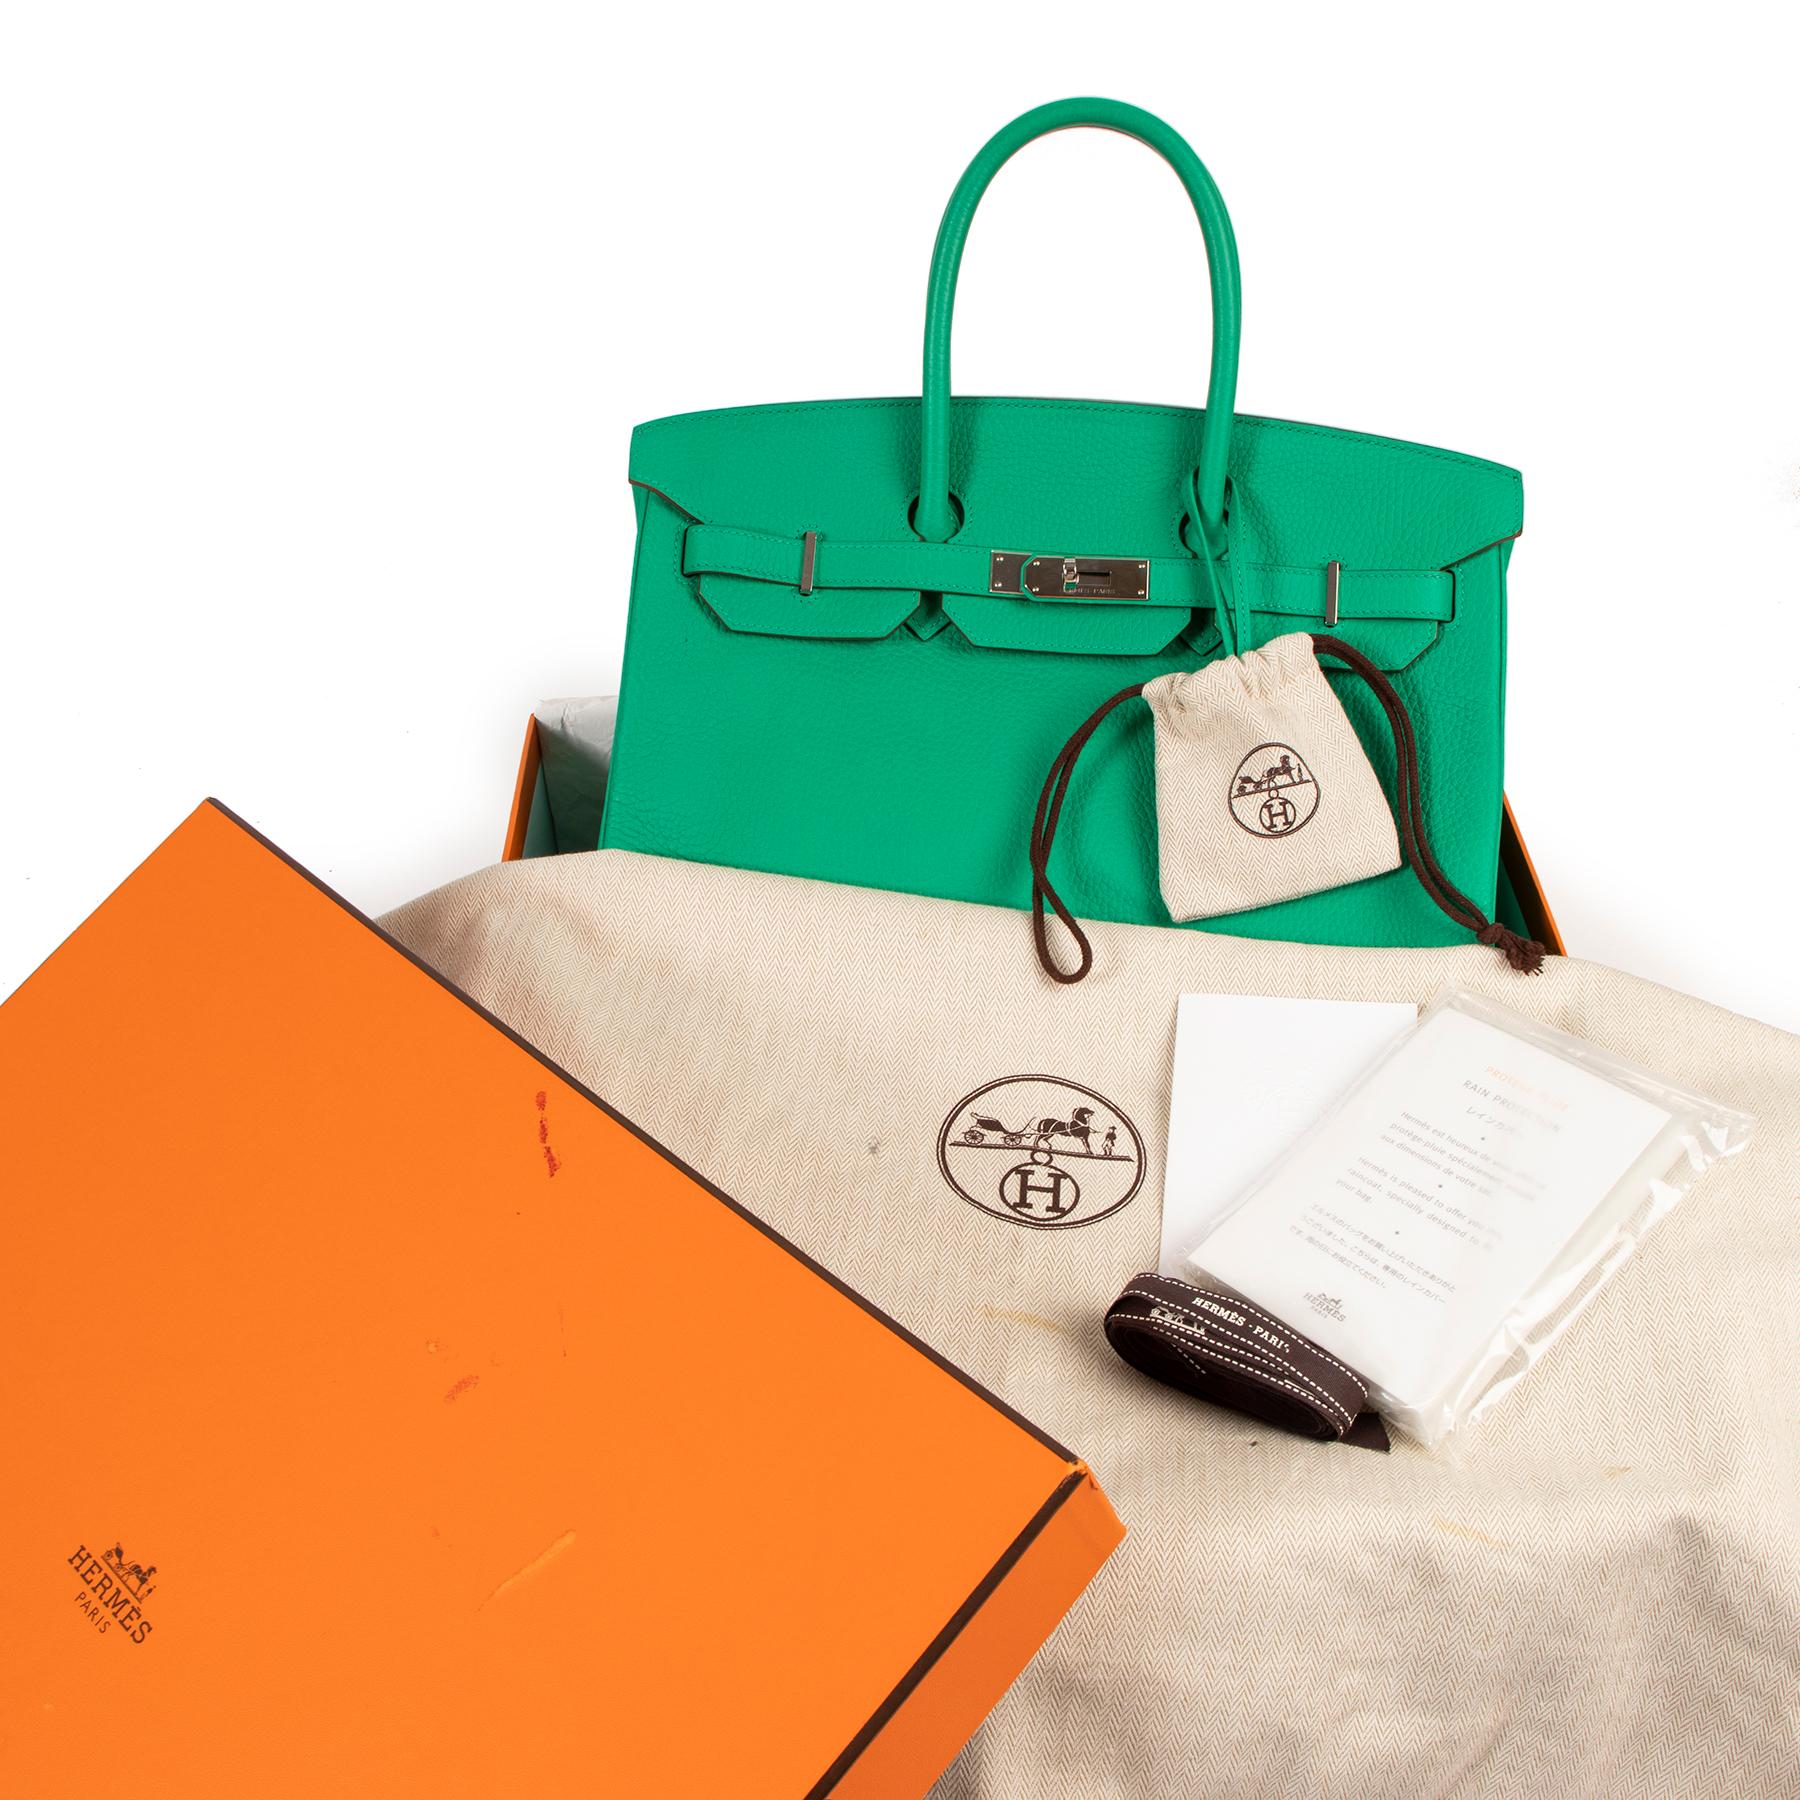 Excellent condition 

Hermès Birkin 35cm taurillon clemence green menthe PHW

 Extremely rare color this fun and vibrant color.
A lovely combination with the clemence leather and the palladium hardware.



Comes with

Original Hermès receipt
Hermès